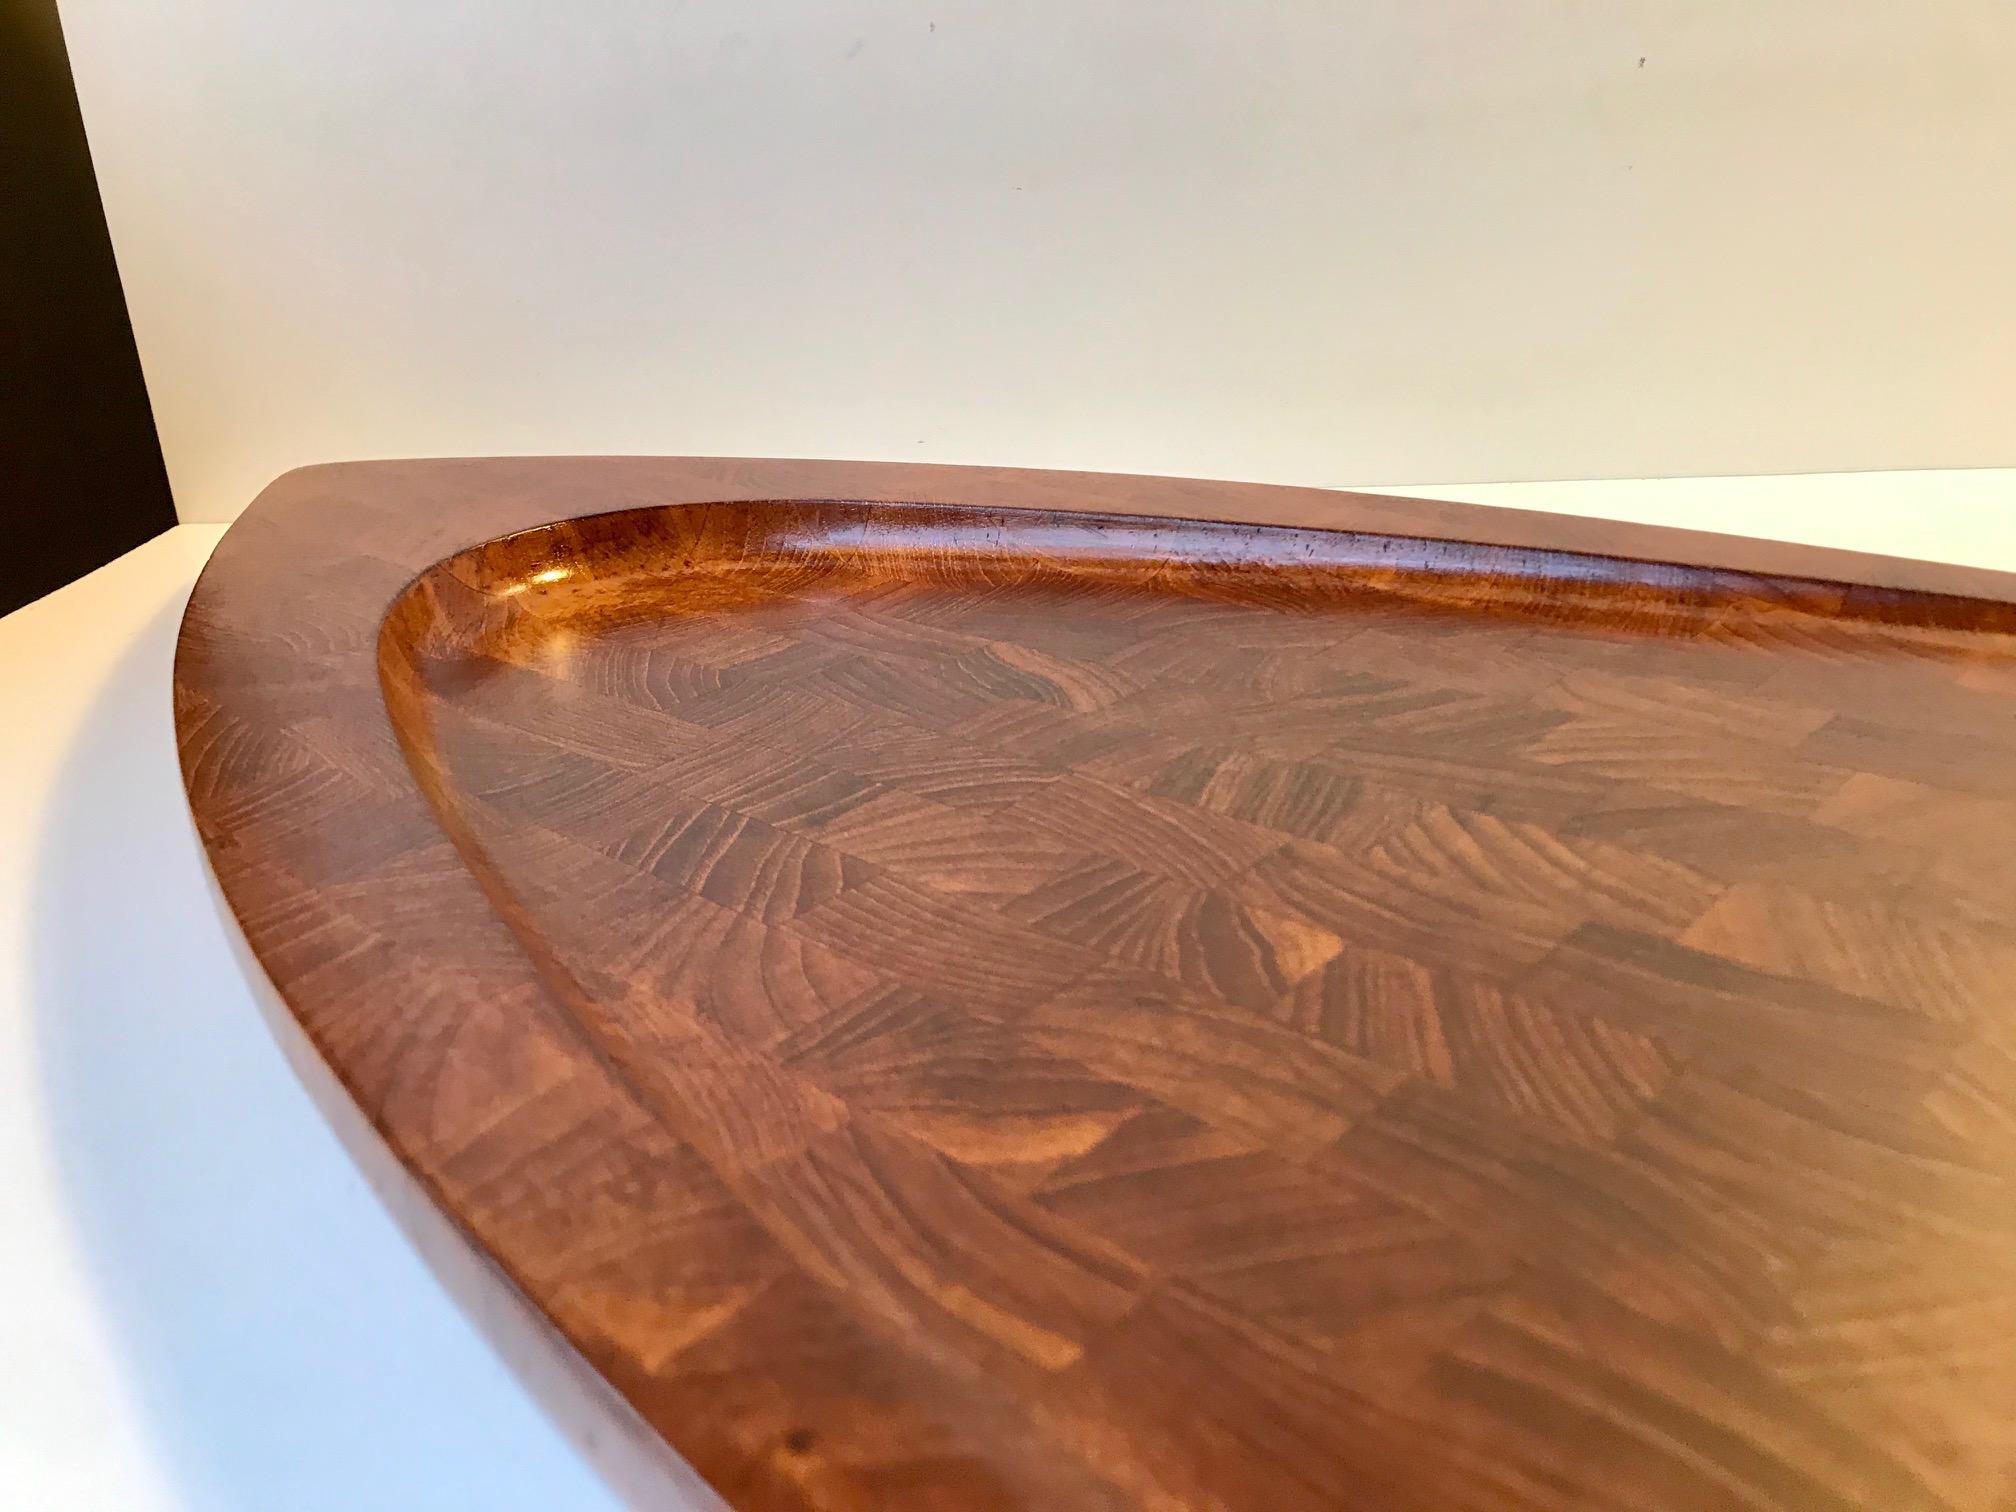 Large wall hung meat serving or cutting board in solid stacked teak. Designed by Flemming Digsmed and manufactured by his Company Digsmed during the mid to late 1960s. This cutting board has been cleaned, sanded and oiled and its condition is